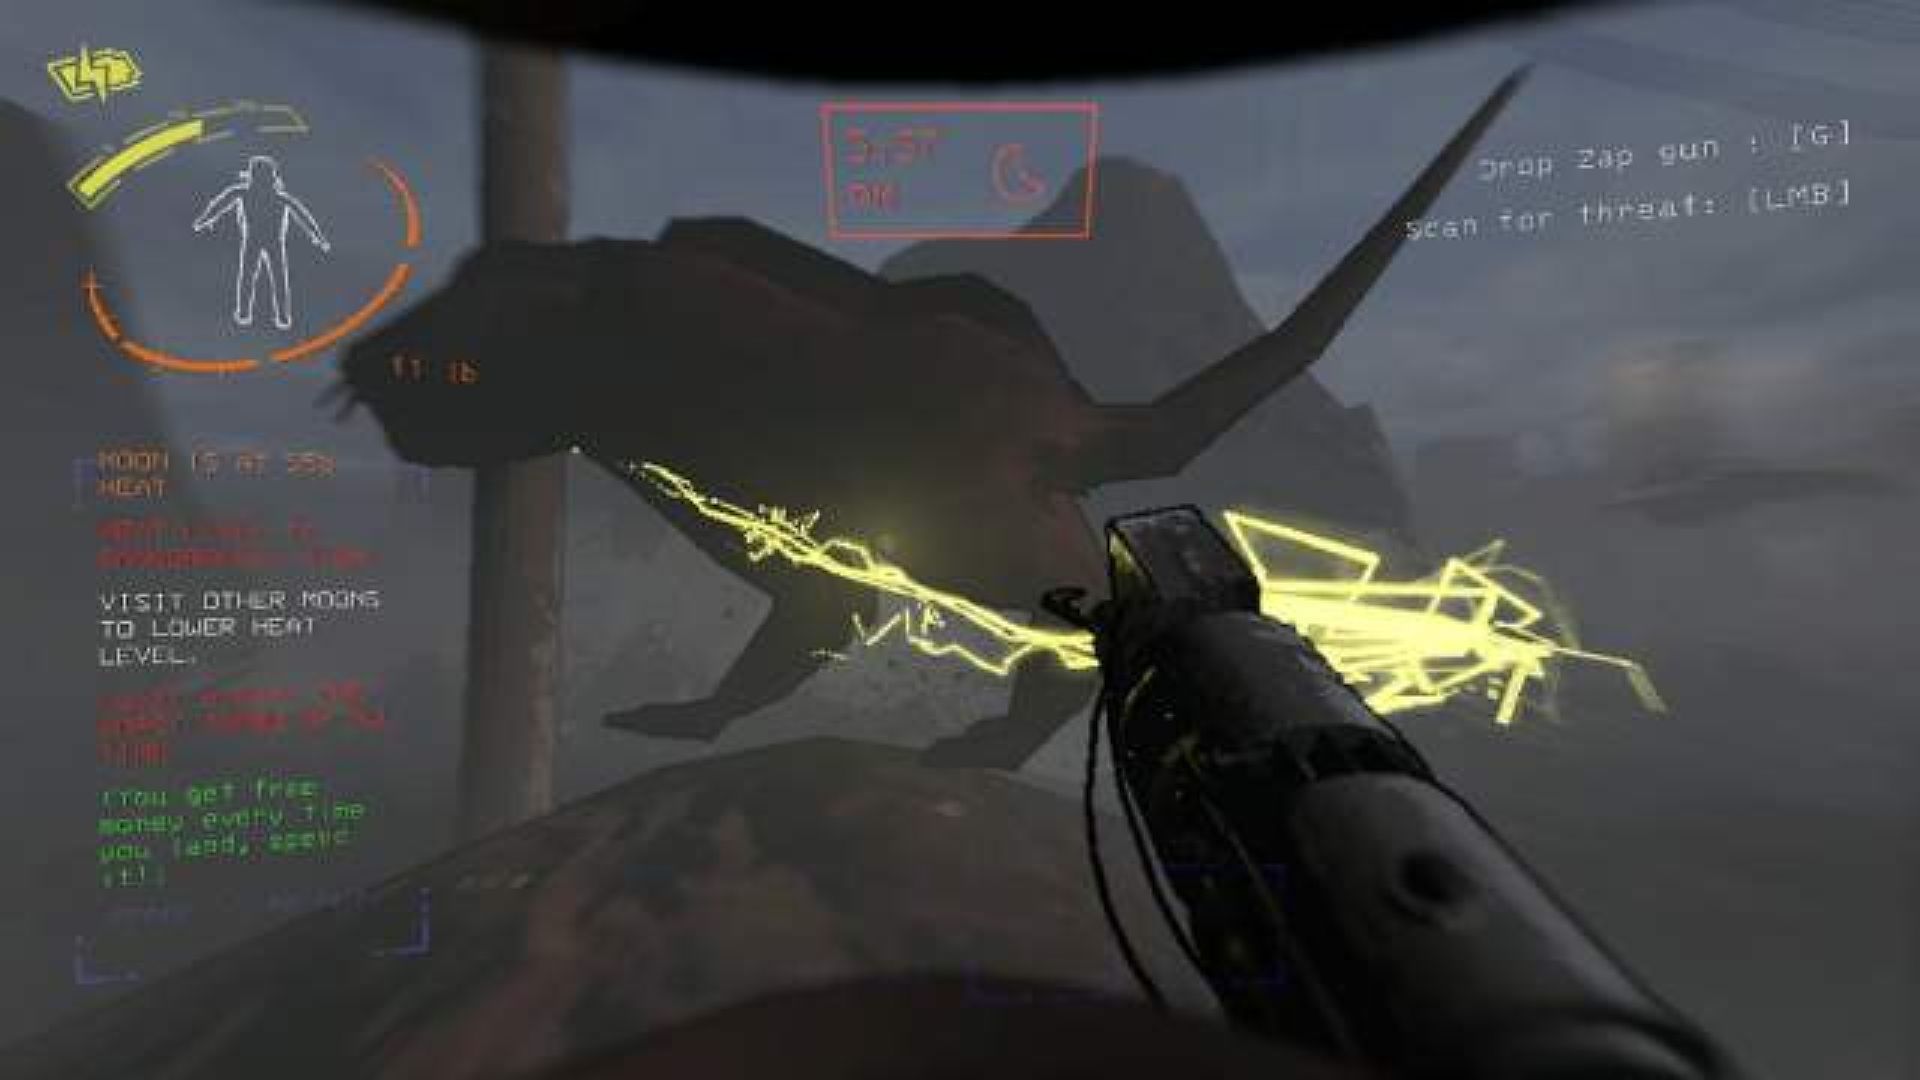 The player using the Zap Gun on the Eyeless Dog in Lethal Company